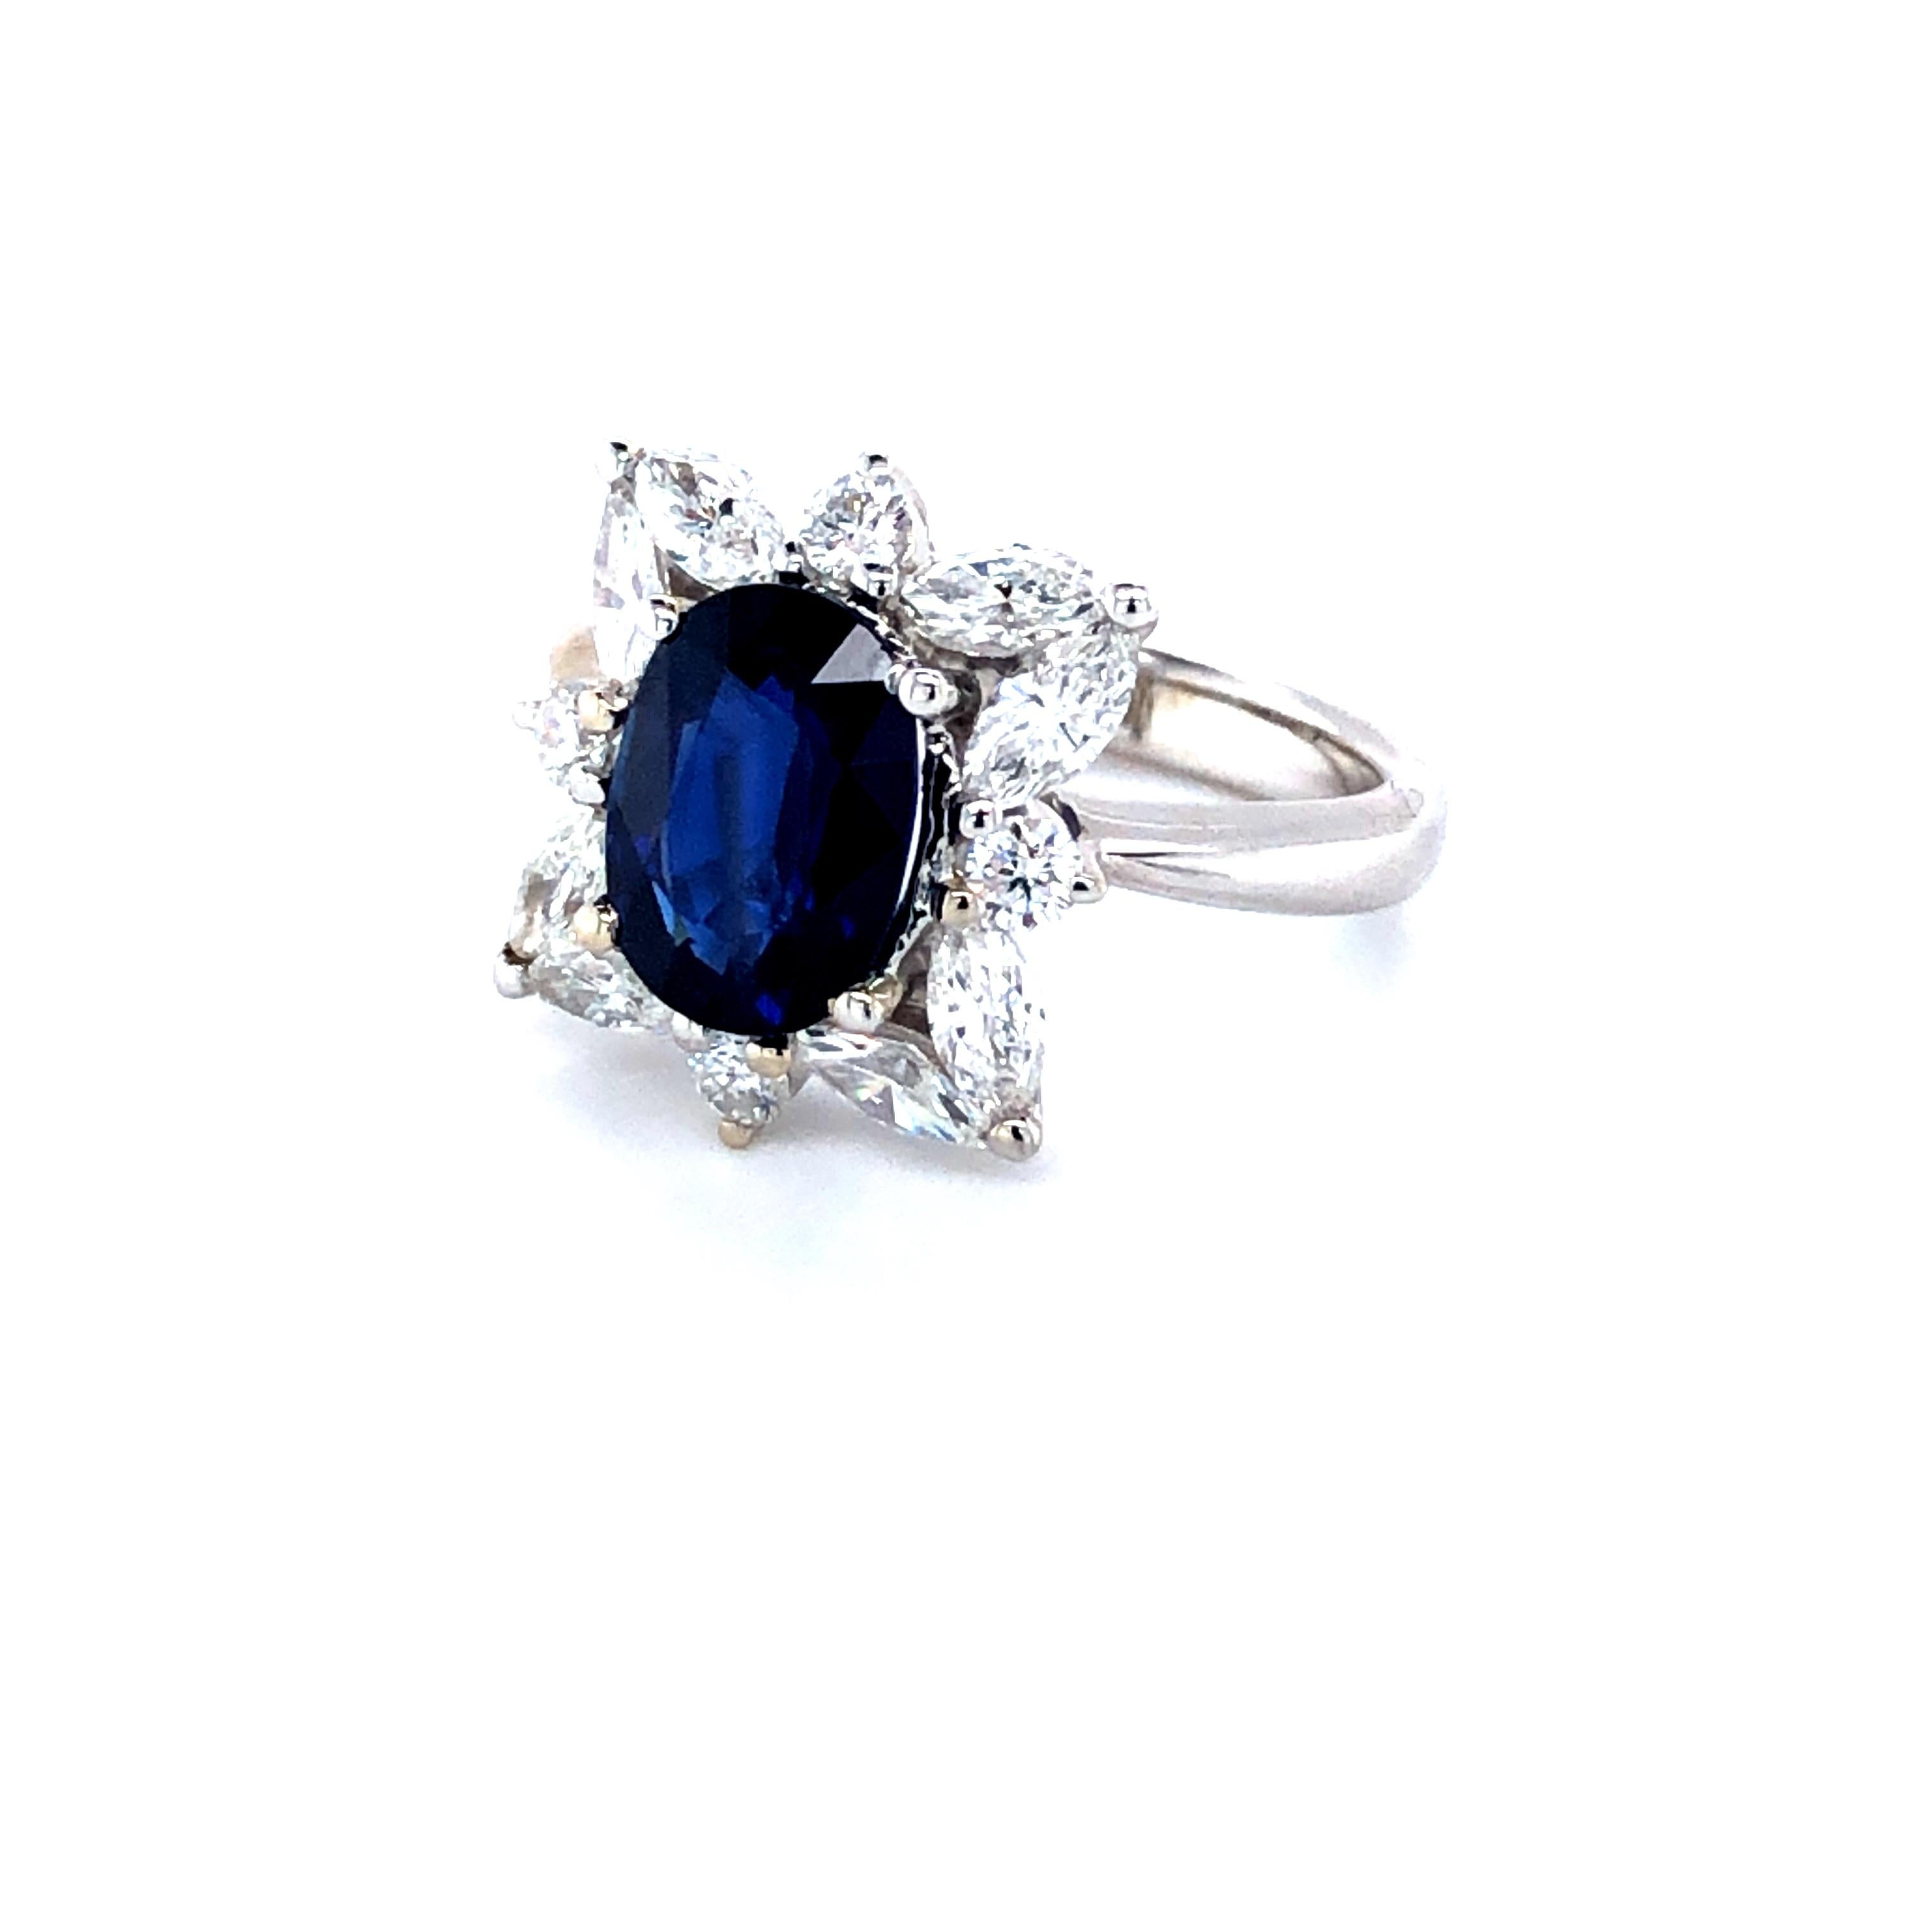 Offered here is an opulent Sapphire and diamond ring in 18kt white gold, circa late last century, in pristine condition. 
Featuring one natural earth mined blue Sapphire, provenance is Madagascar, A.G.L certified to be natural corundum sapphire